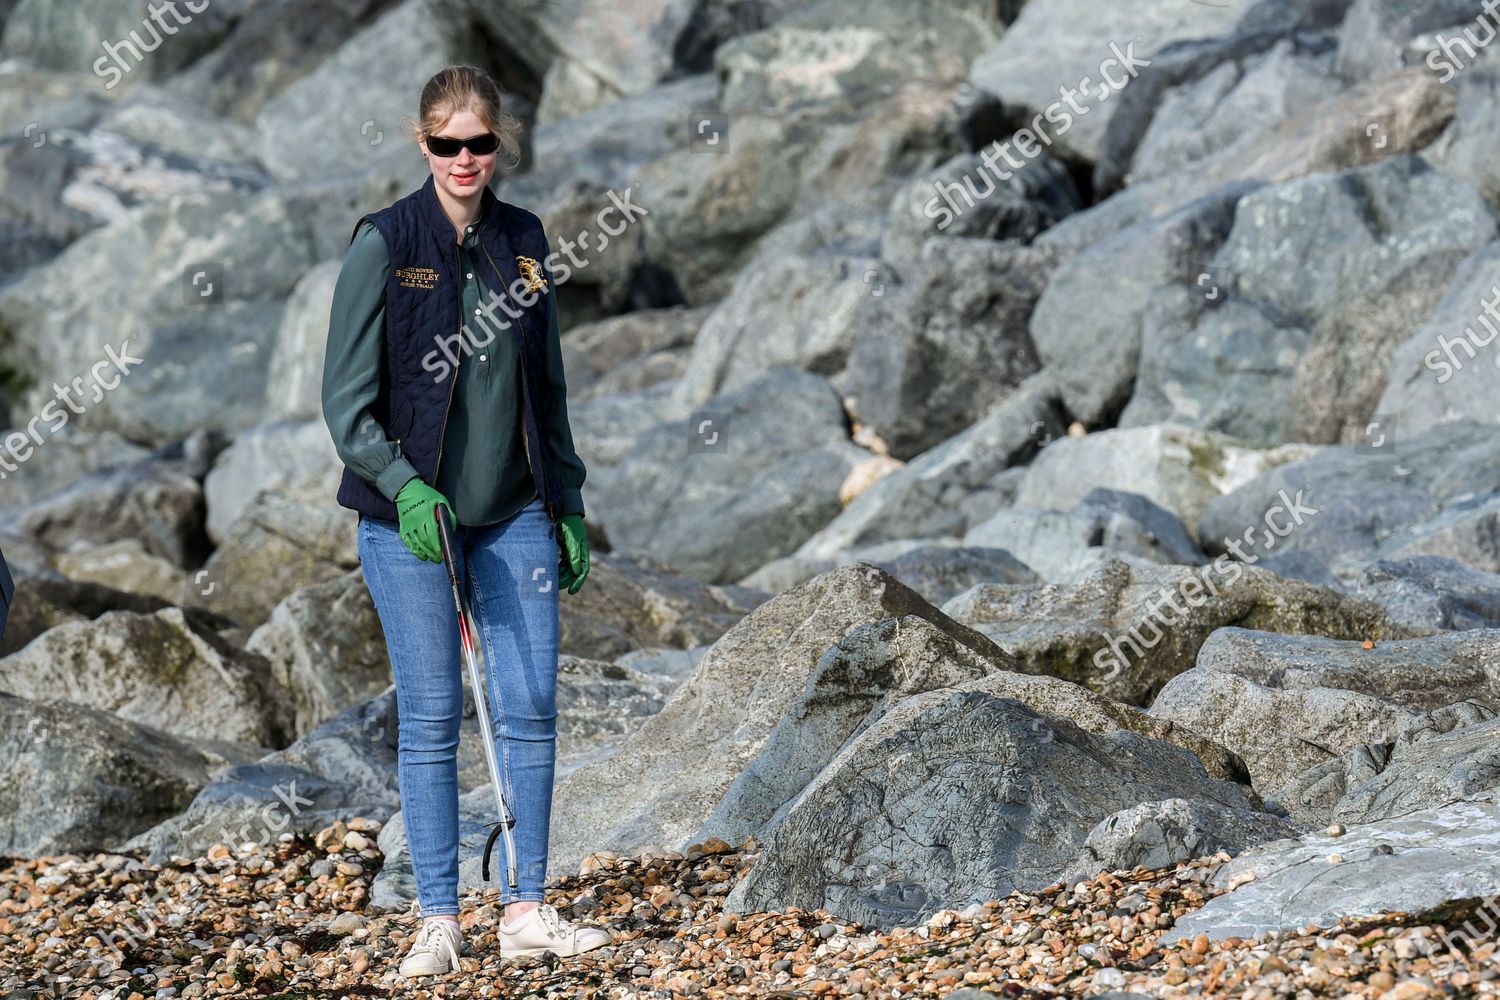 prince-edward-and-sophie-countess-of-wessex-great-british-beach-clean-southsea-beach-portsmouth-uk-shutterstock-editorial-10782998bx.jpg